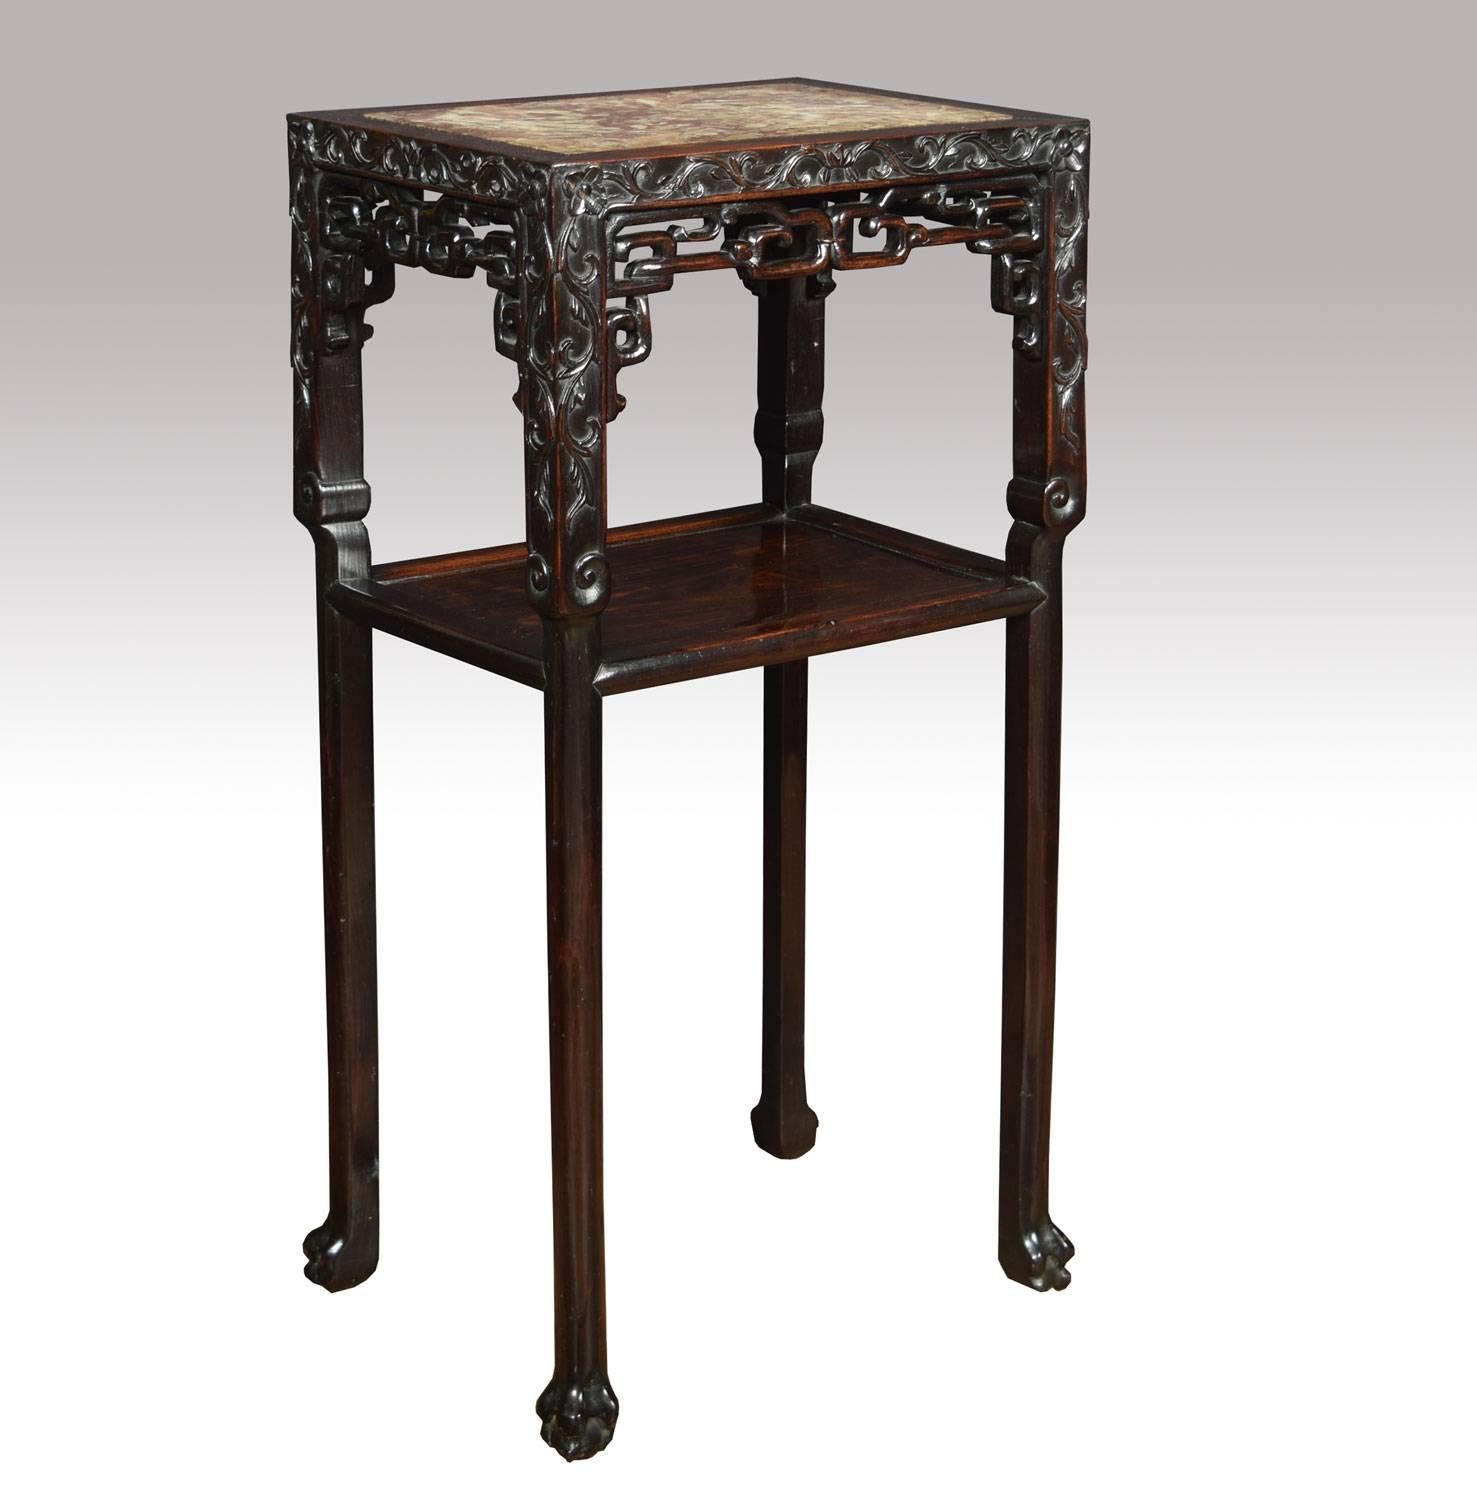 Pair of Chinese rosewood and marble tables, the rectangular top set with panels of variegated marble, above pierced and carved panels and open shelves, on square tapering legs with carved feet.

Dimensions:

Height 31.5 inches.

Width 16.5